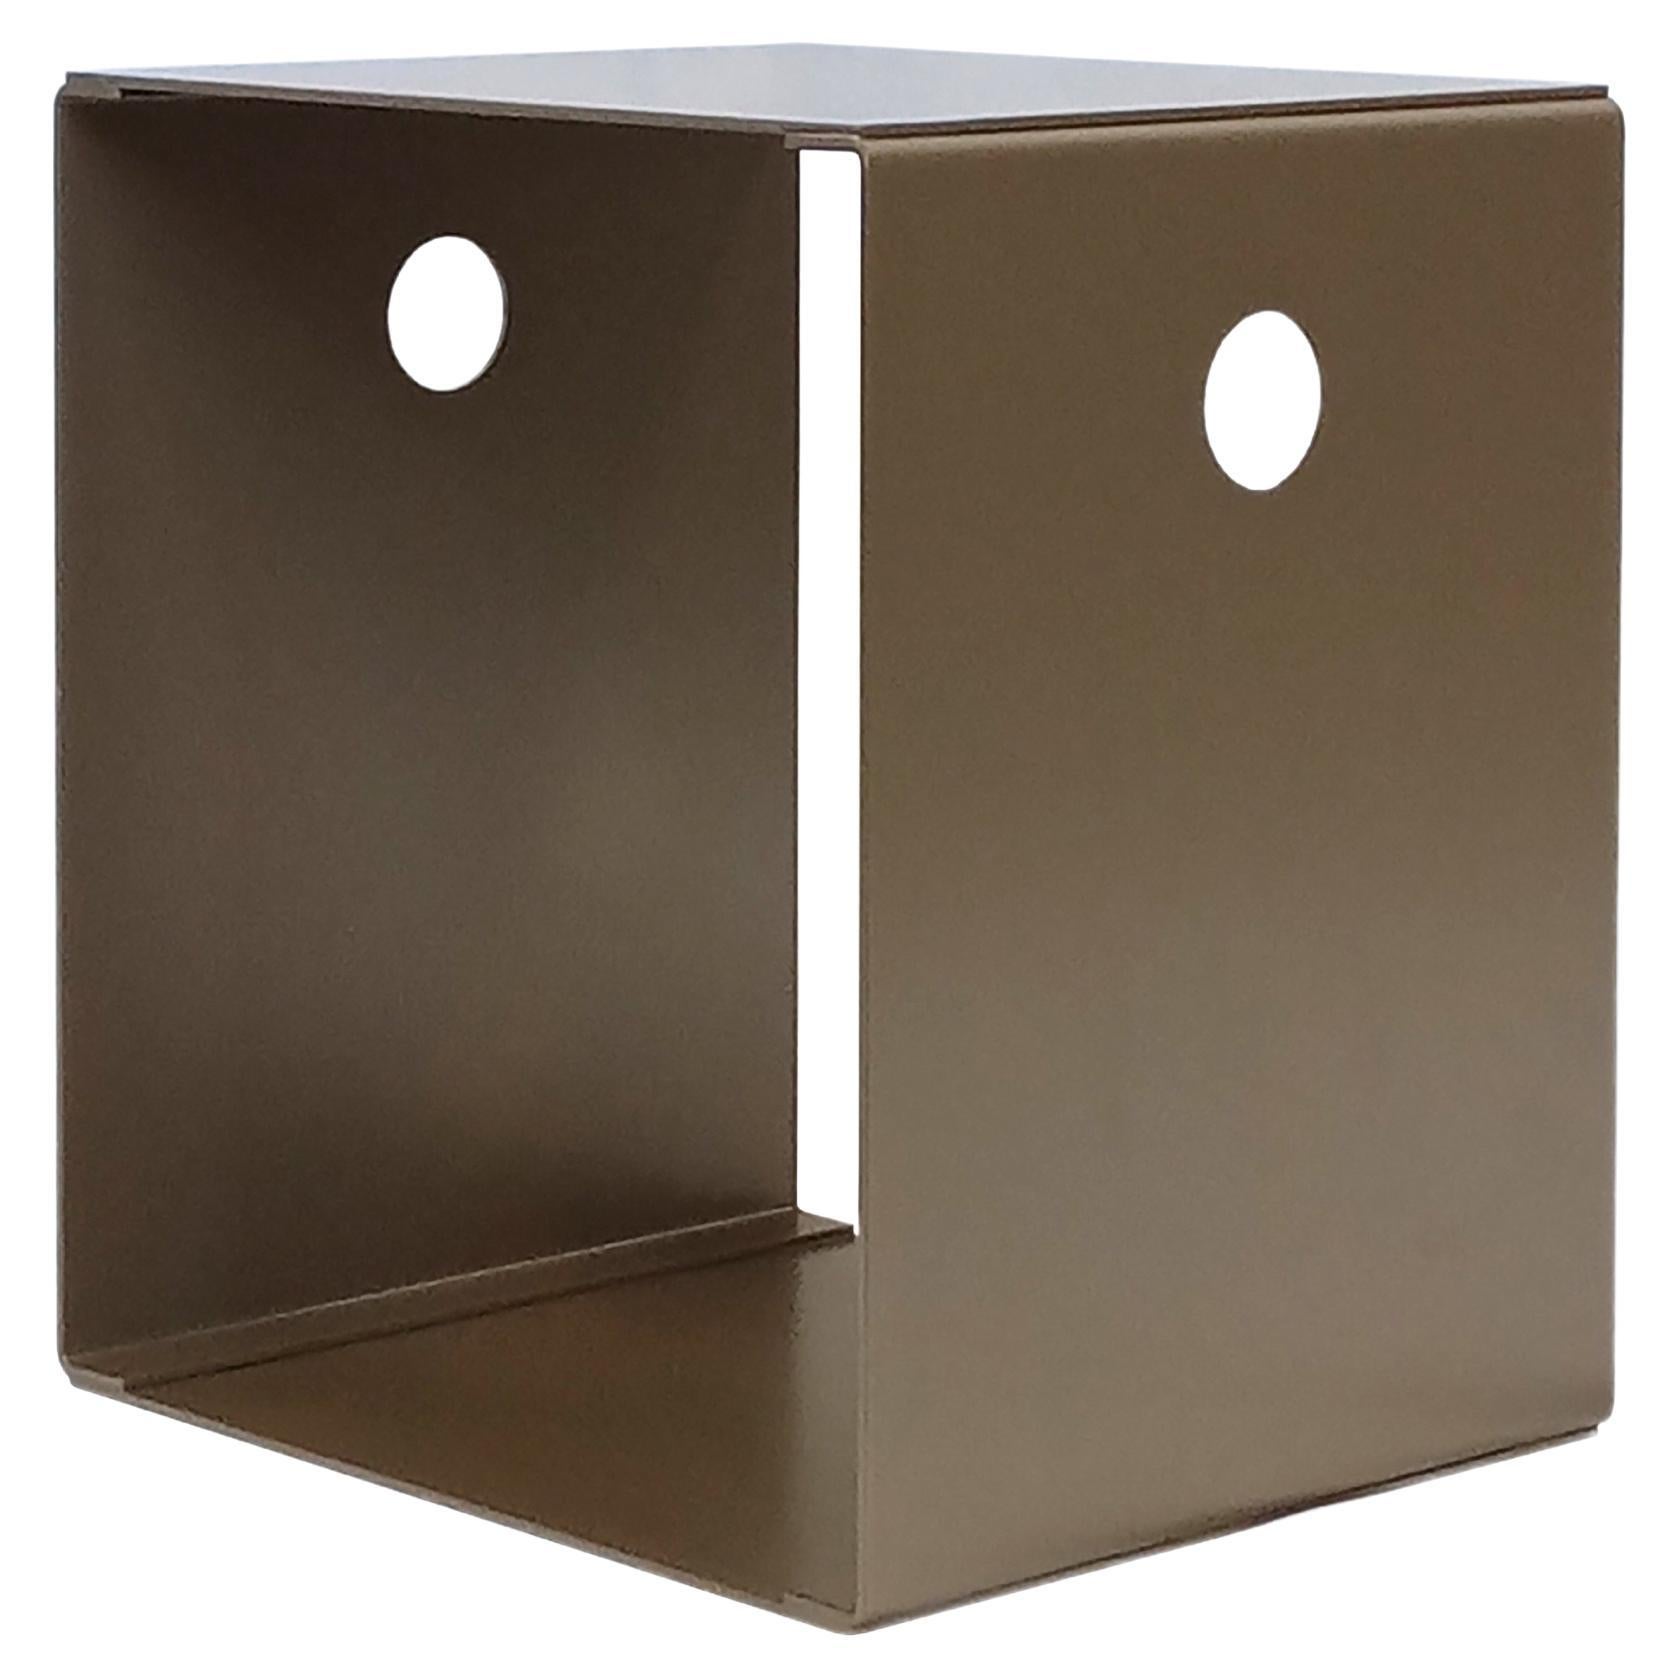 Set of 2 Italian Contemporary Steel Bookcase/Side Table, "Micropolis" by Errante For Sale